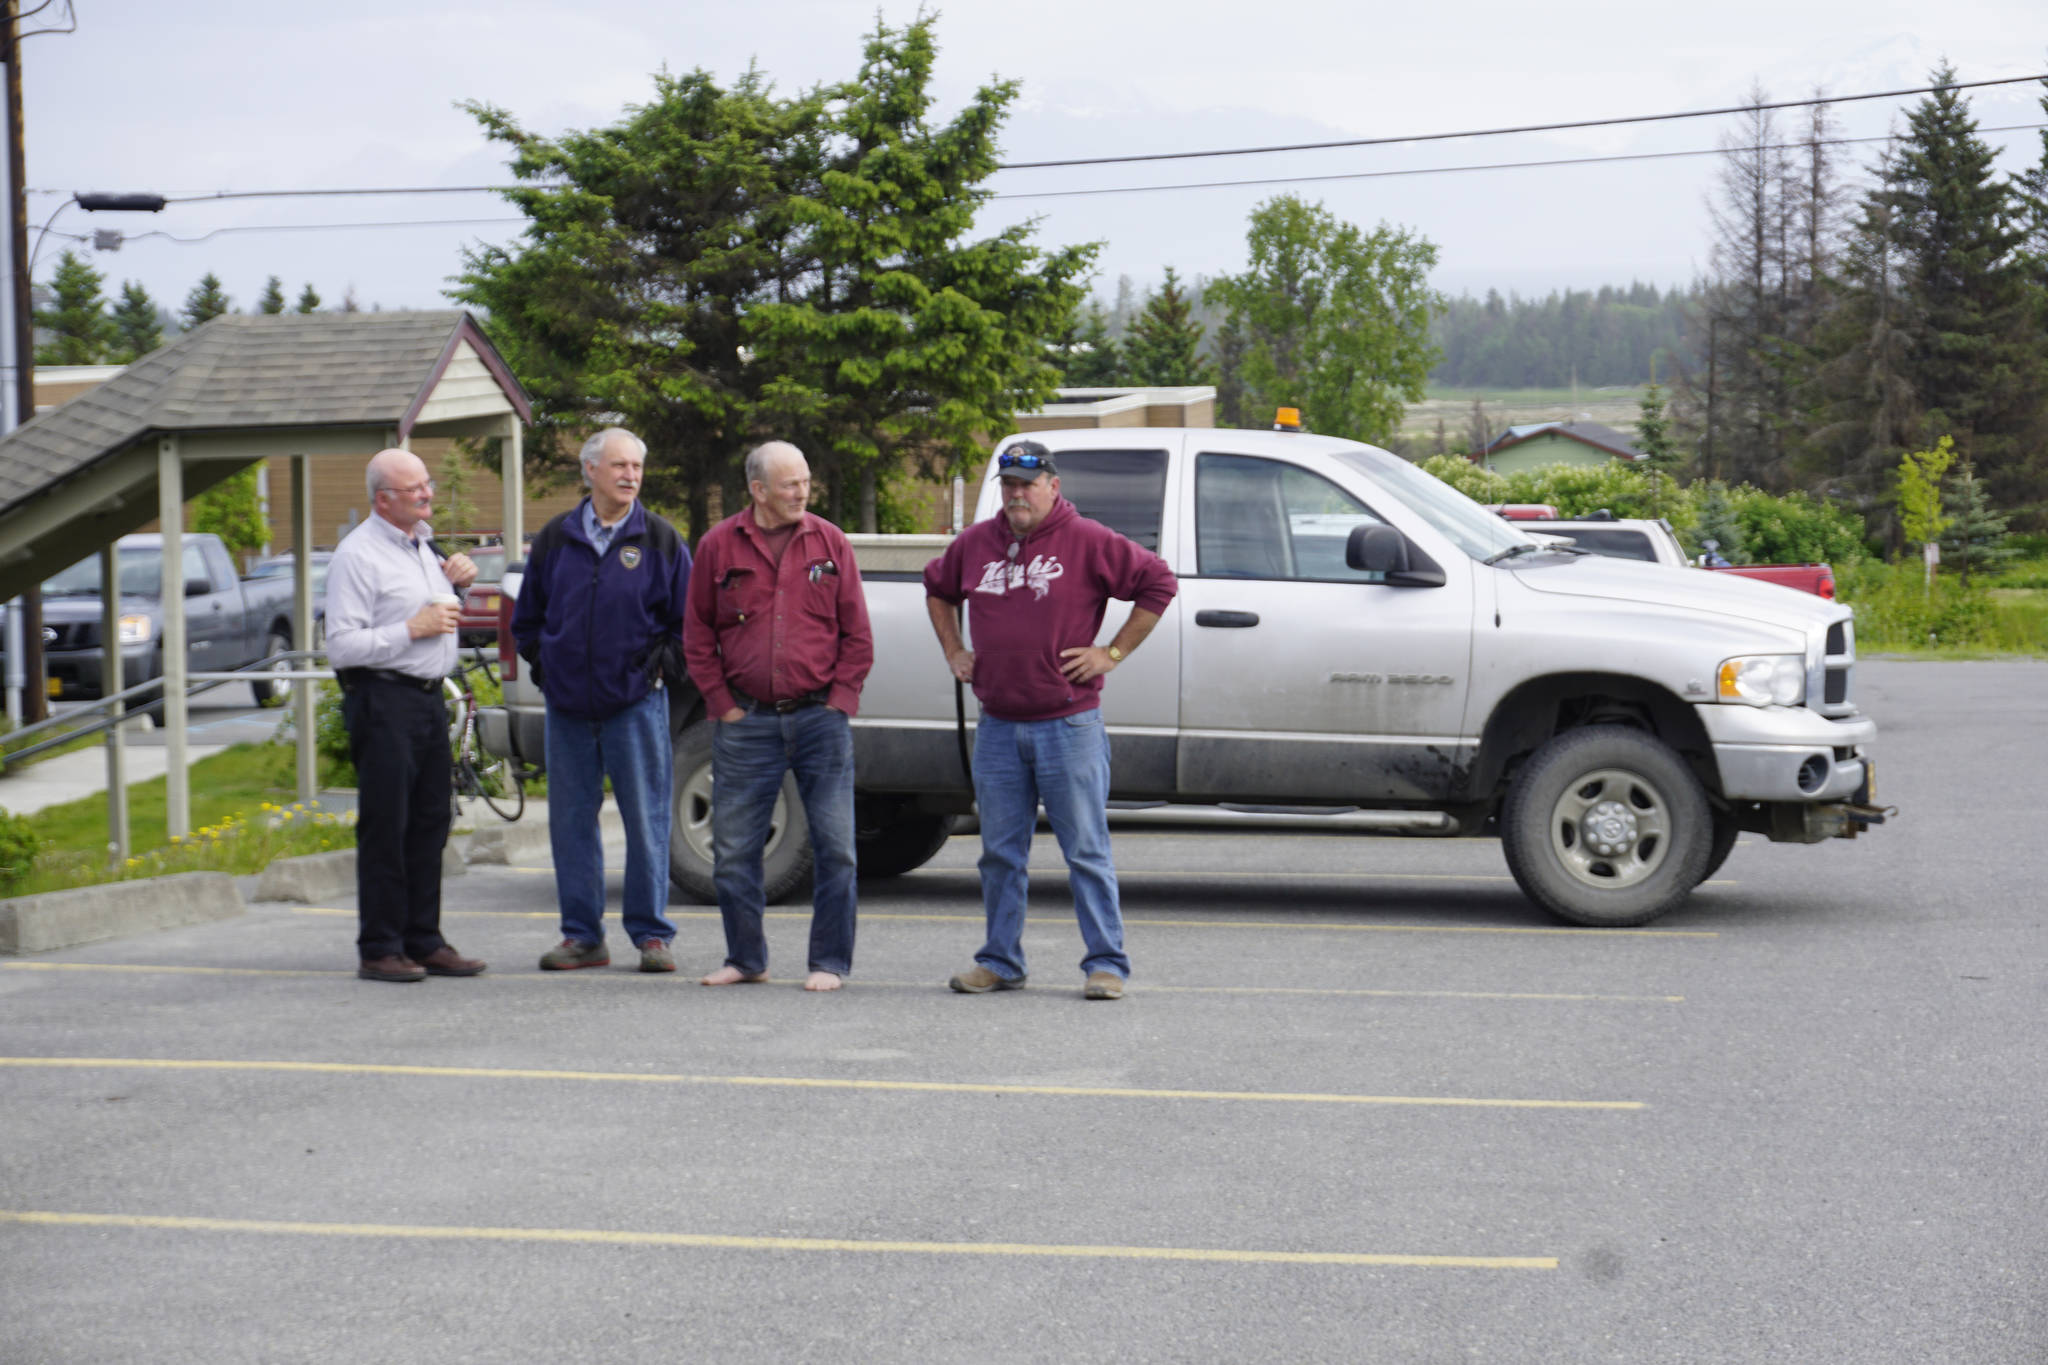 A man, right, glares at Mayor Bryan Zak as he read a Mayoral Recognition recognizing June as Homer Pride month Monday, June 11, 2018, at Homer City Hall in Homer, Alaska. The man yelled "Shame on you Bryan!" as he drove into the parking lot. (Photo by Michael Armstrong/Homer News)